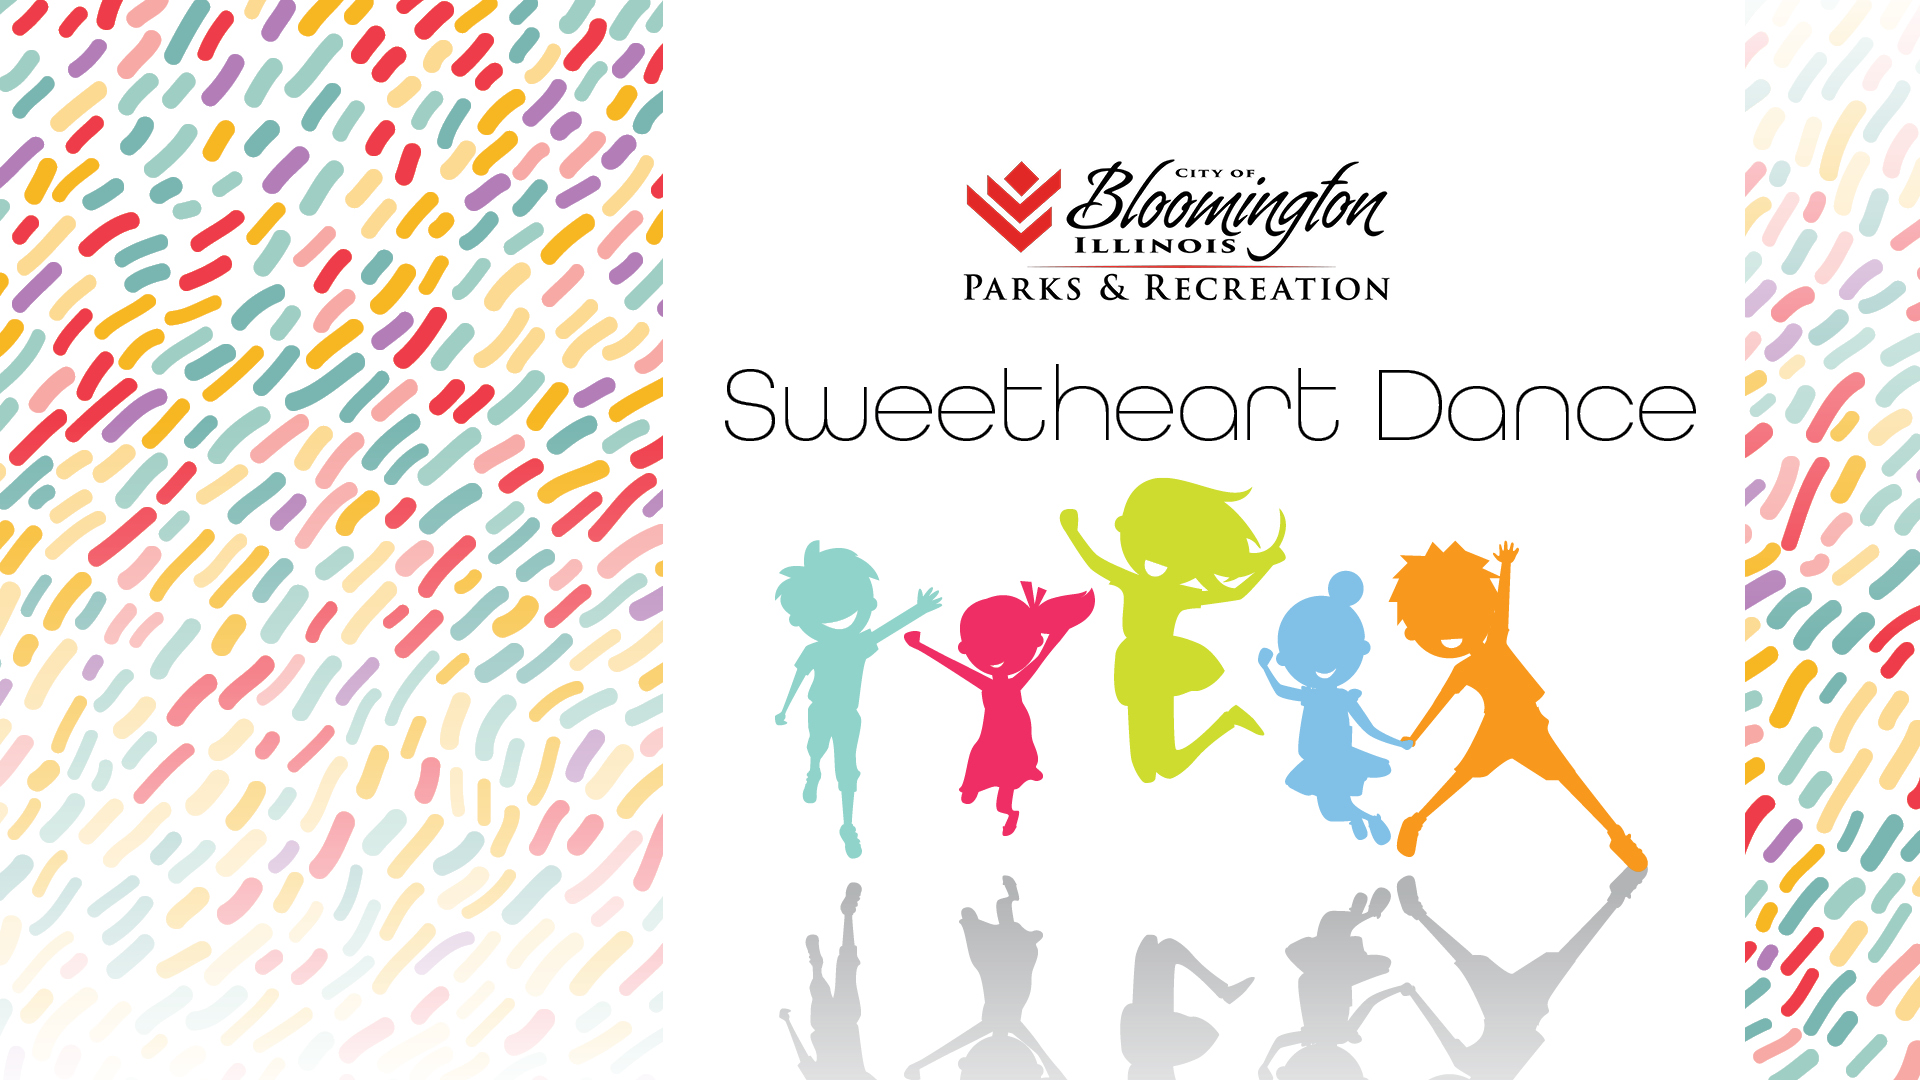 Sweetheart Dance with Bloomington Parks & Rec